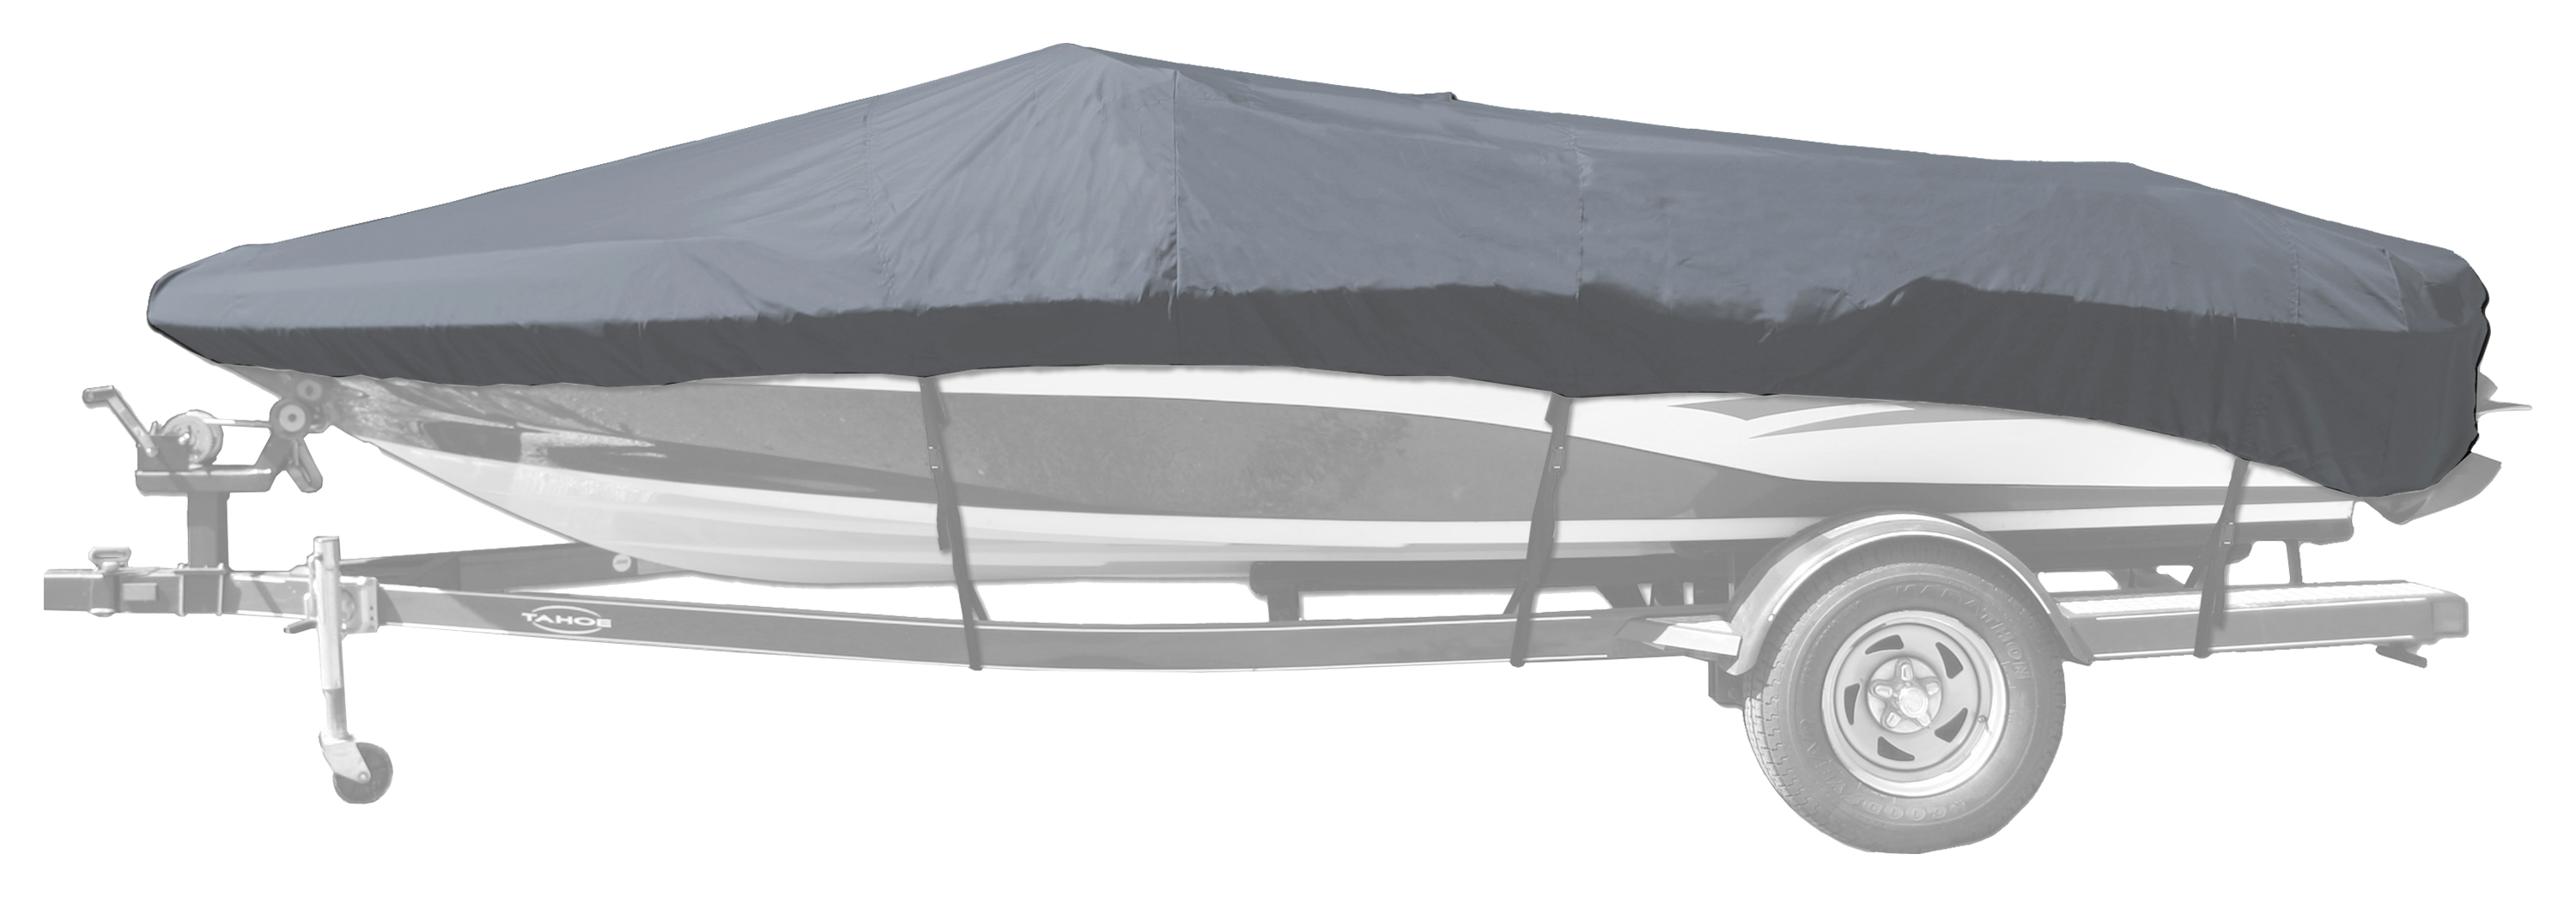 Bass Pro Shops Select Fit Hurricane Boat Cover by Westland for Euro V-Hull Runabout I/O Model - Gray - 16'6'' to 17'5